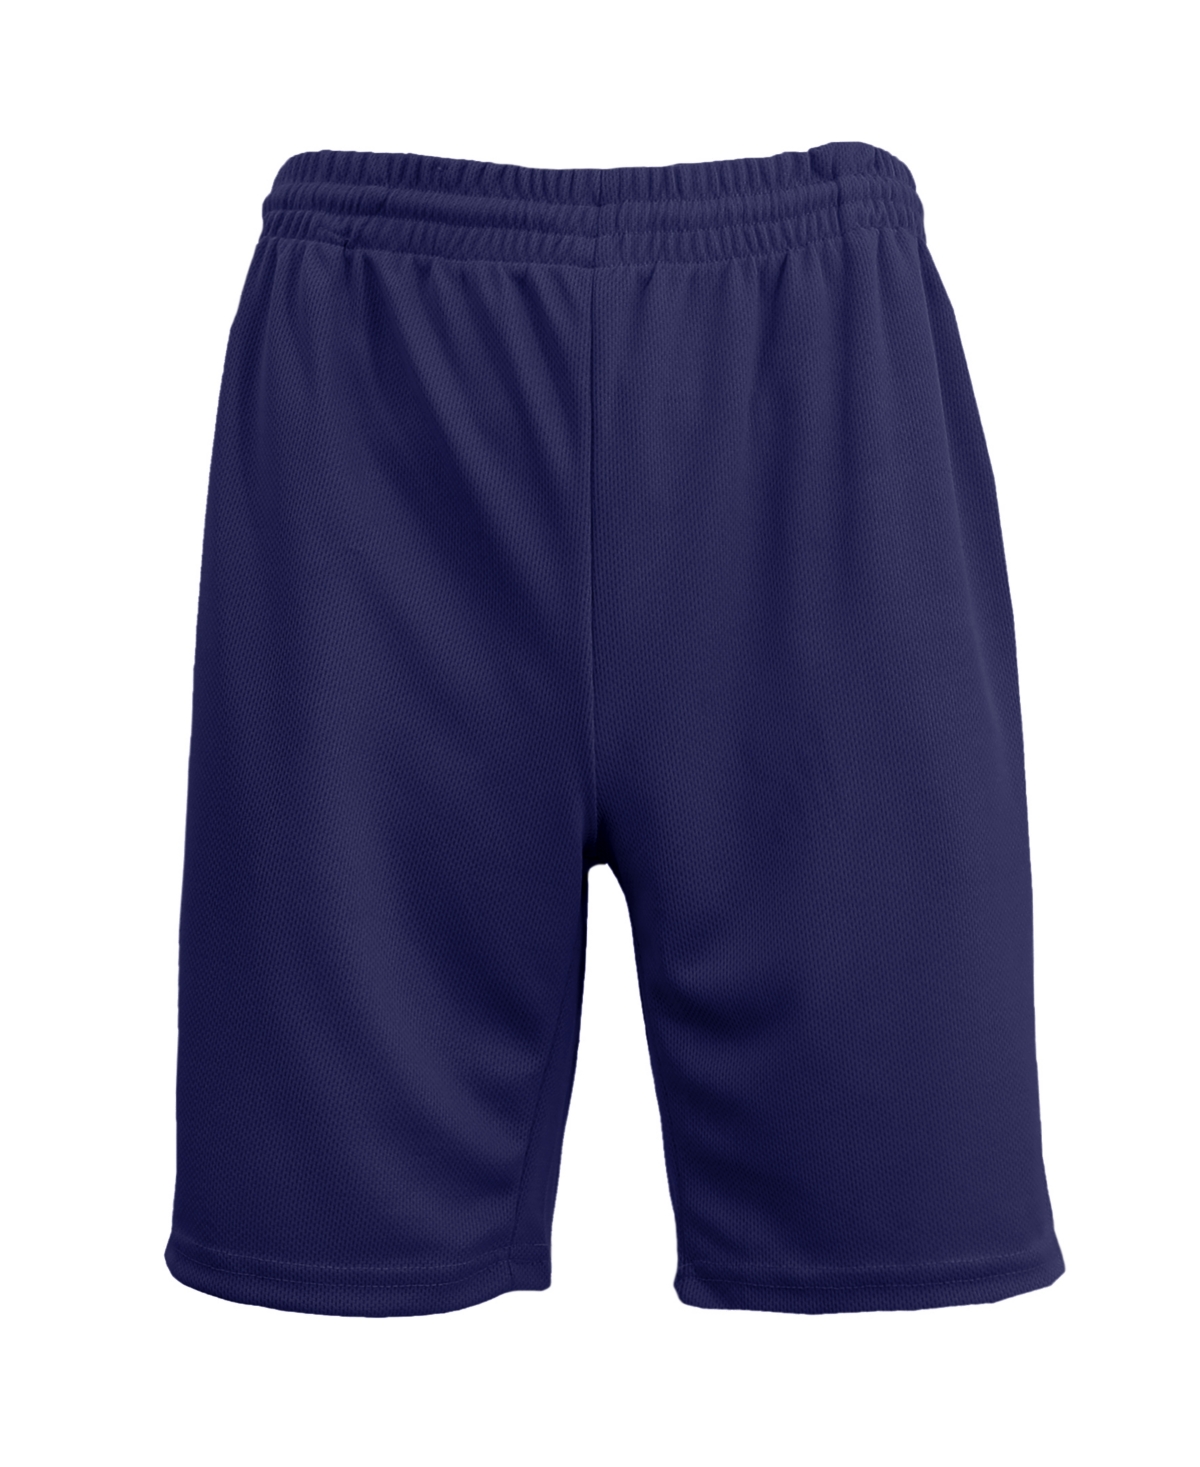 Galaxy By Harvic Men's Oversized Moisture Wicking Performance Basic Mesh Shorts In Navy